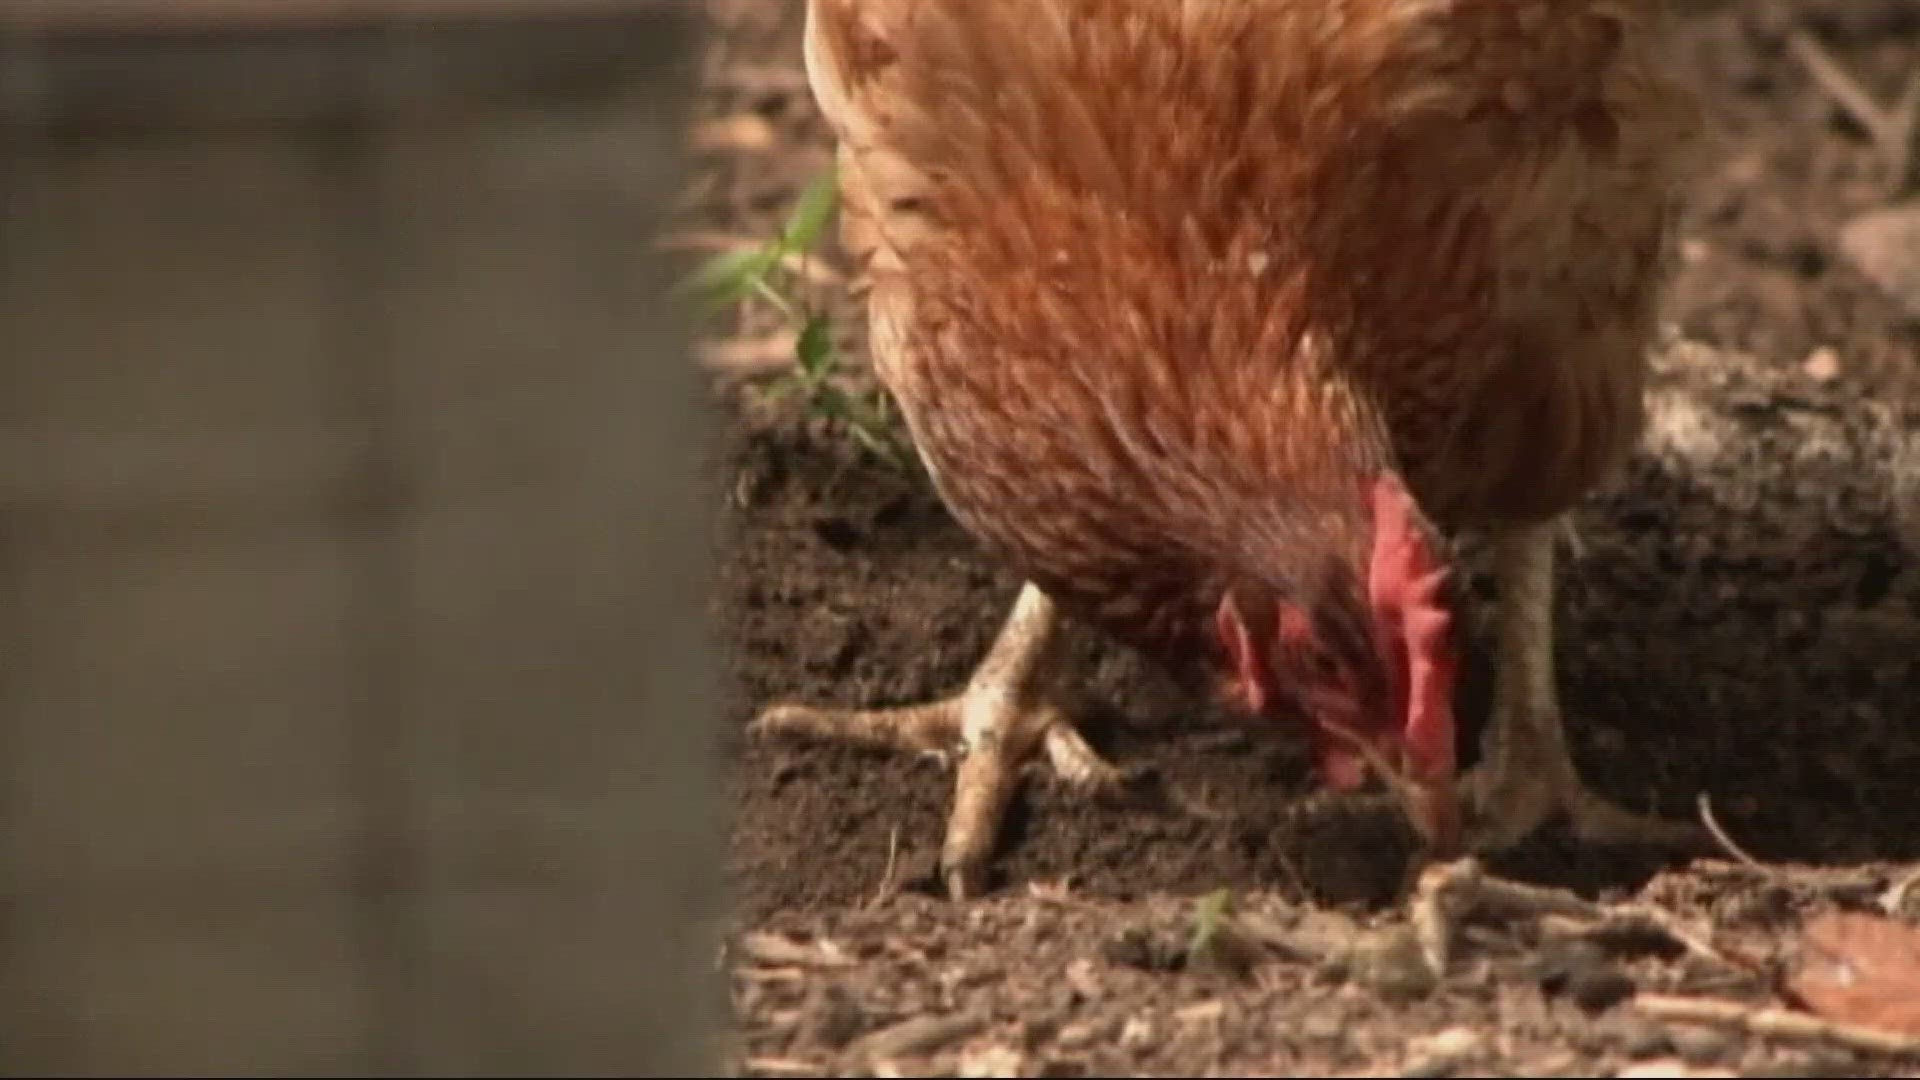 A newborn baby was hospitalized last year after contracting salmonella through the family's backyard chickens.